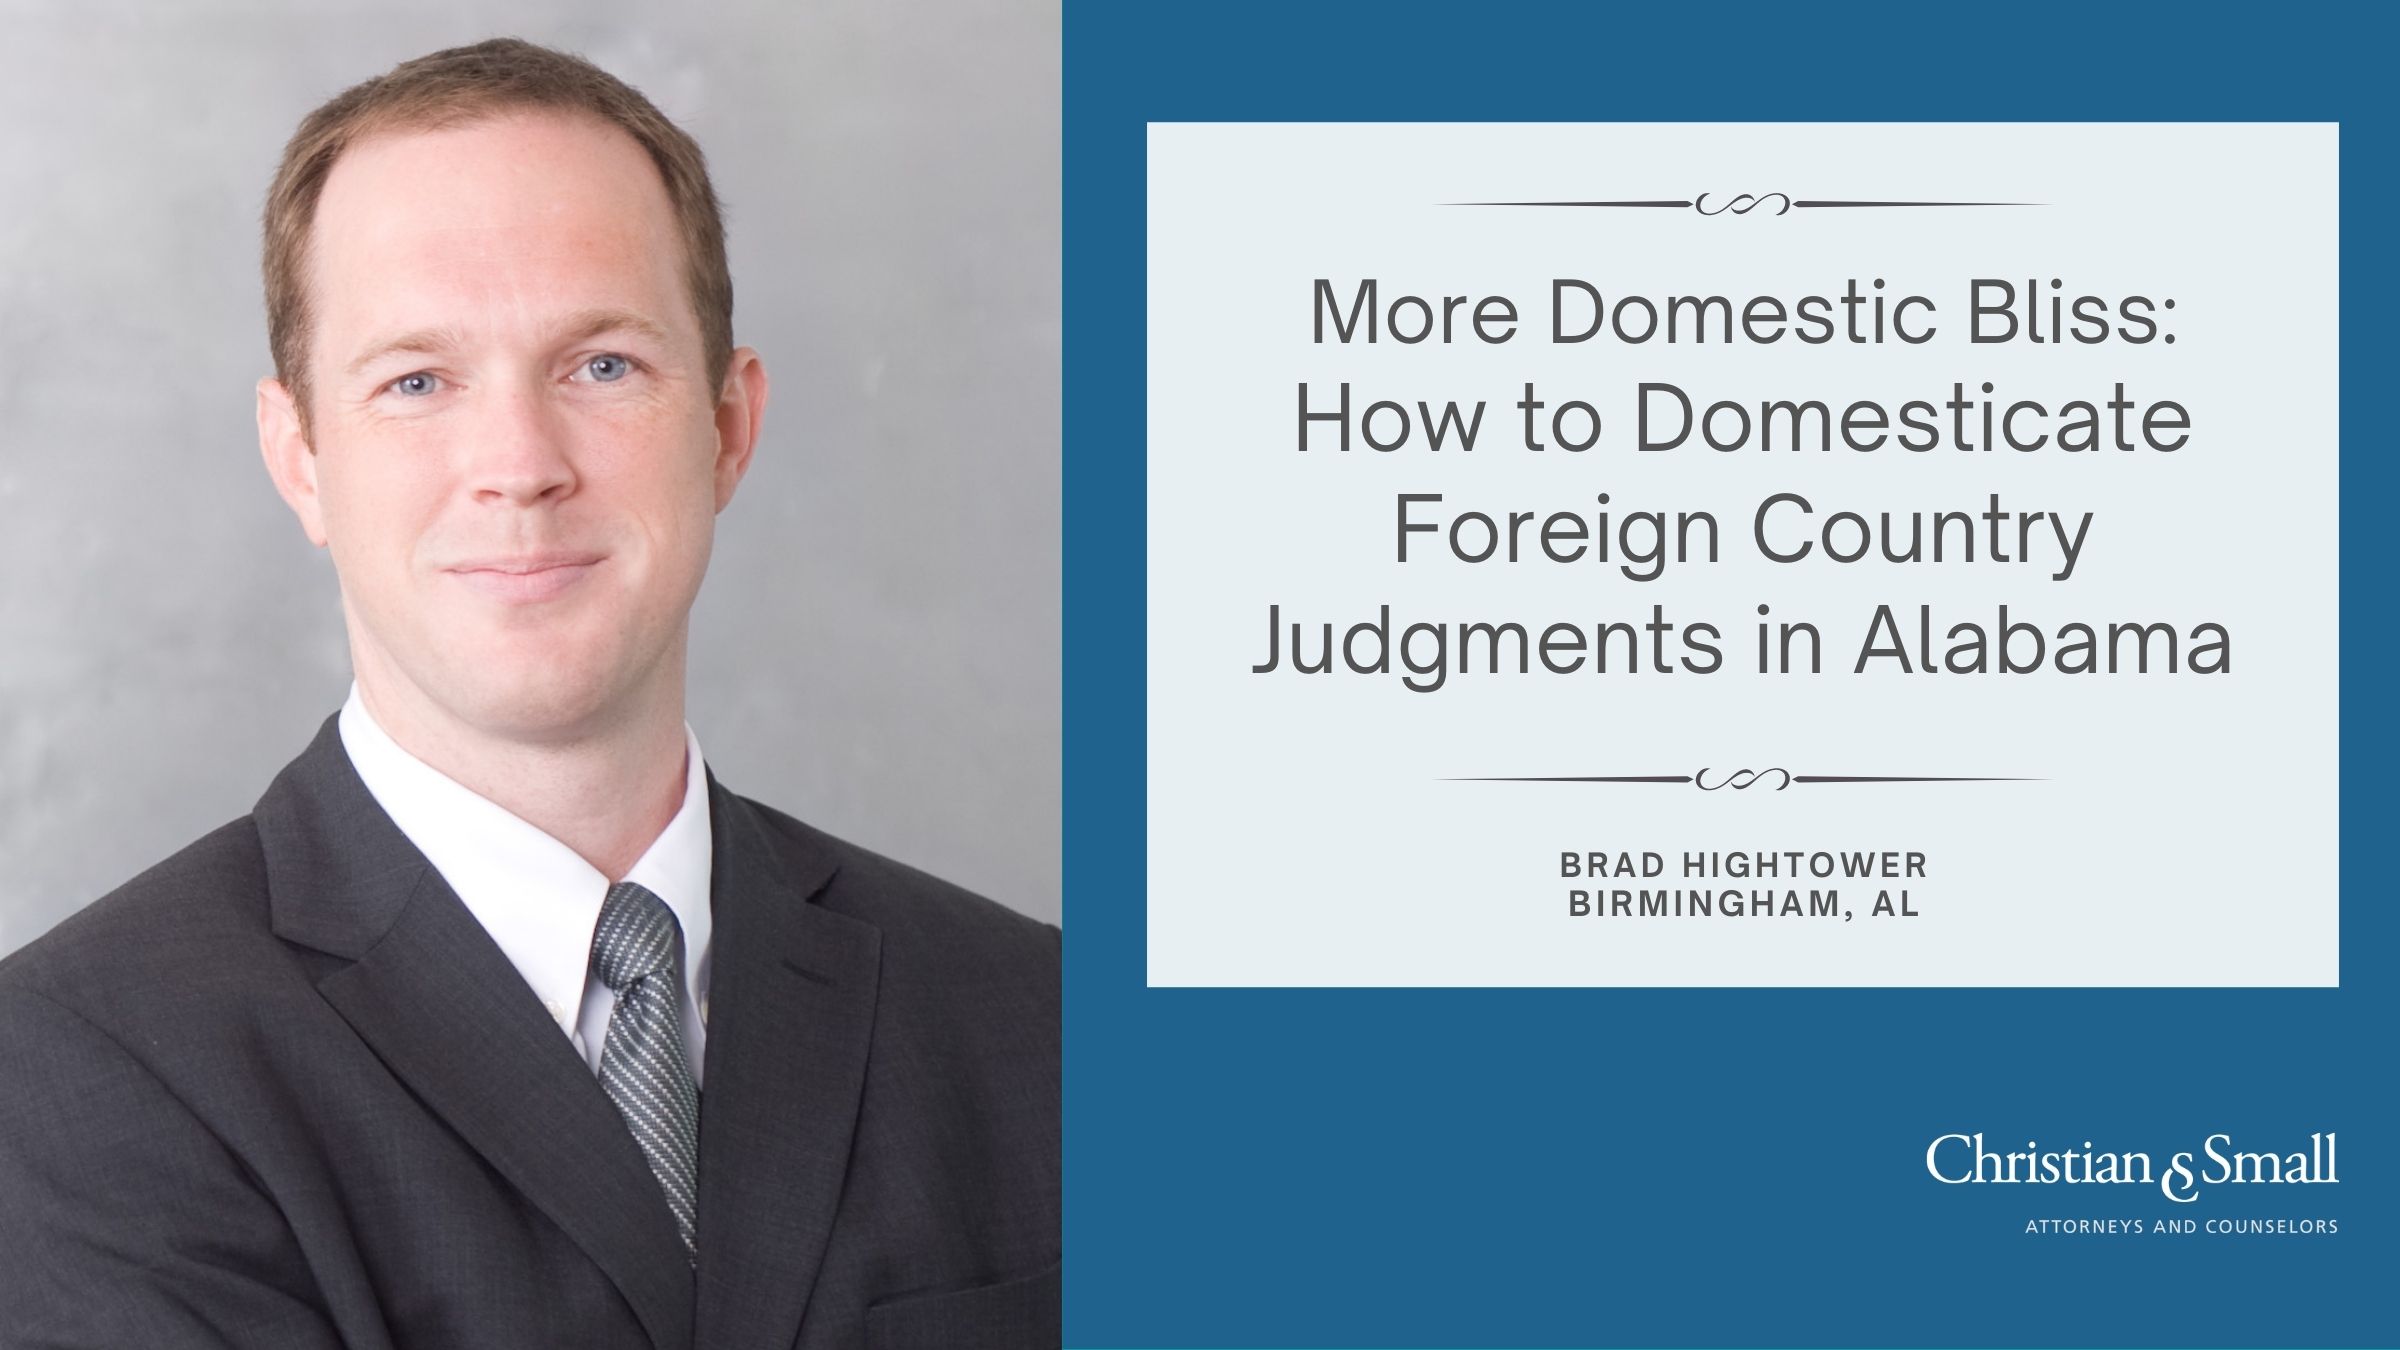 More Domestic Bliss: How to Domesticate Foreign Country Judgments in Alabama